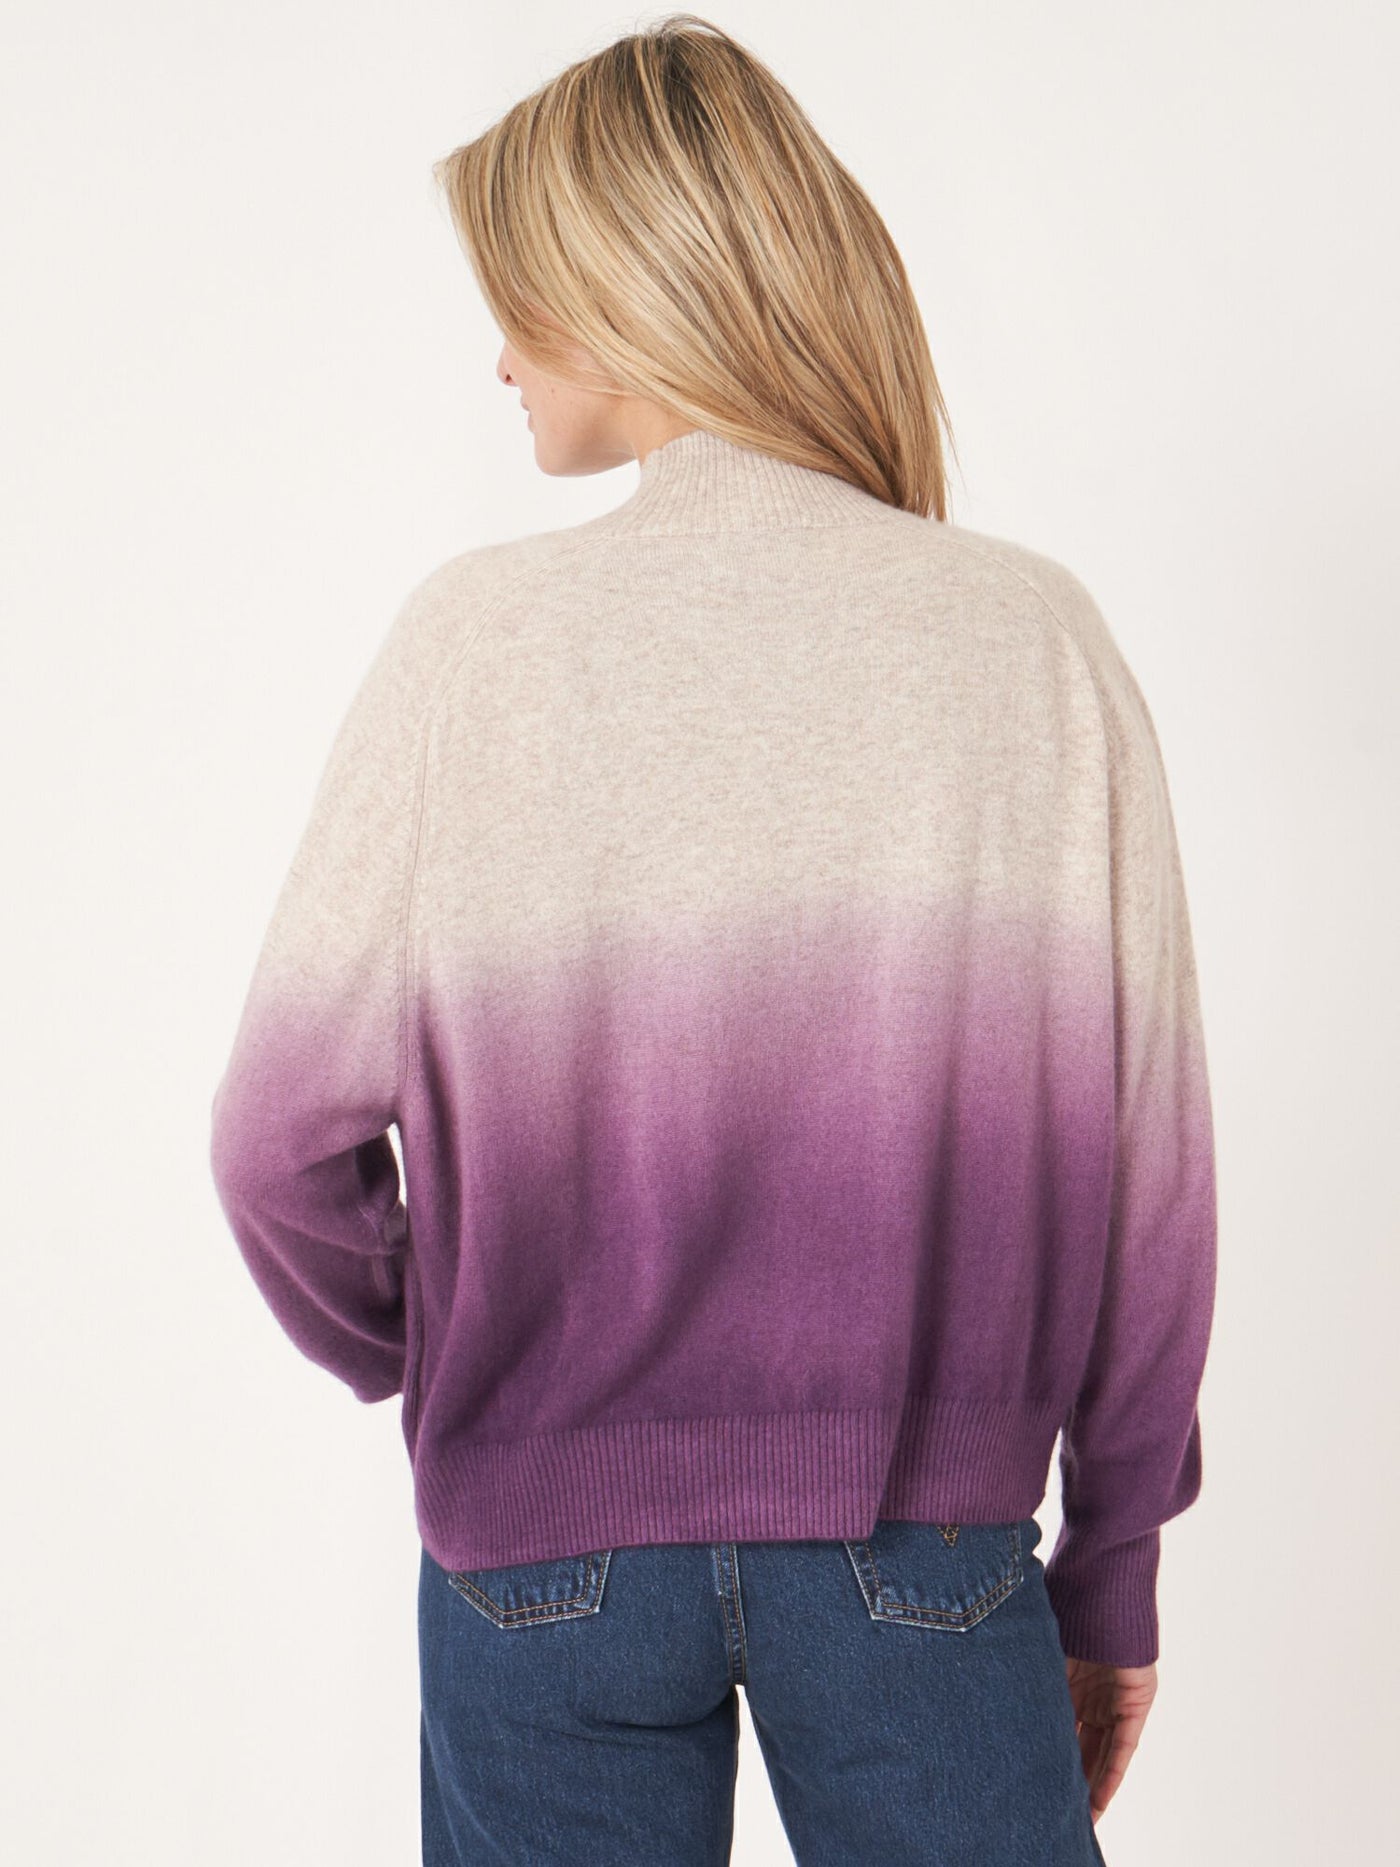 Repeat Dip Dye Cashmere